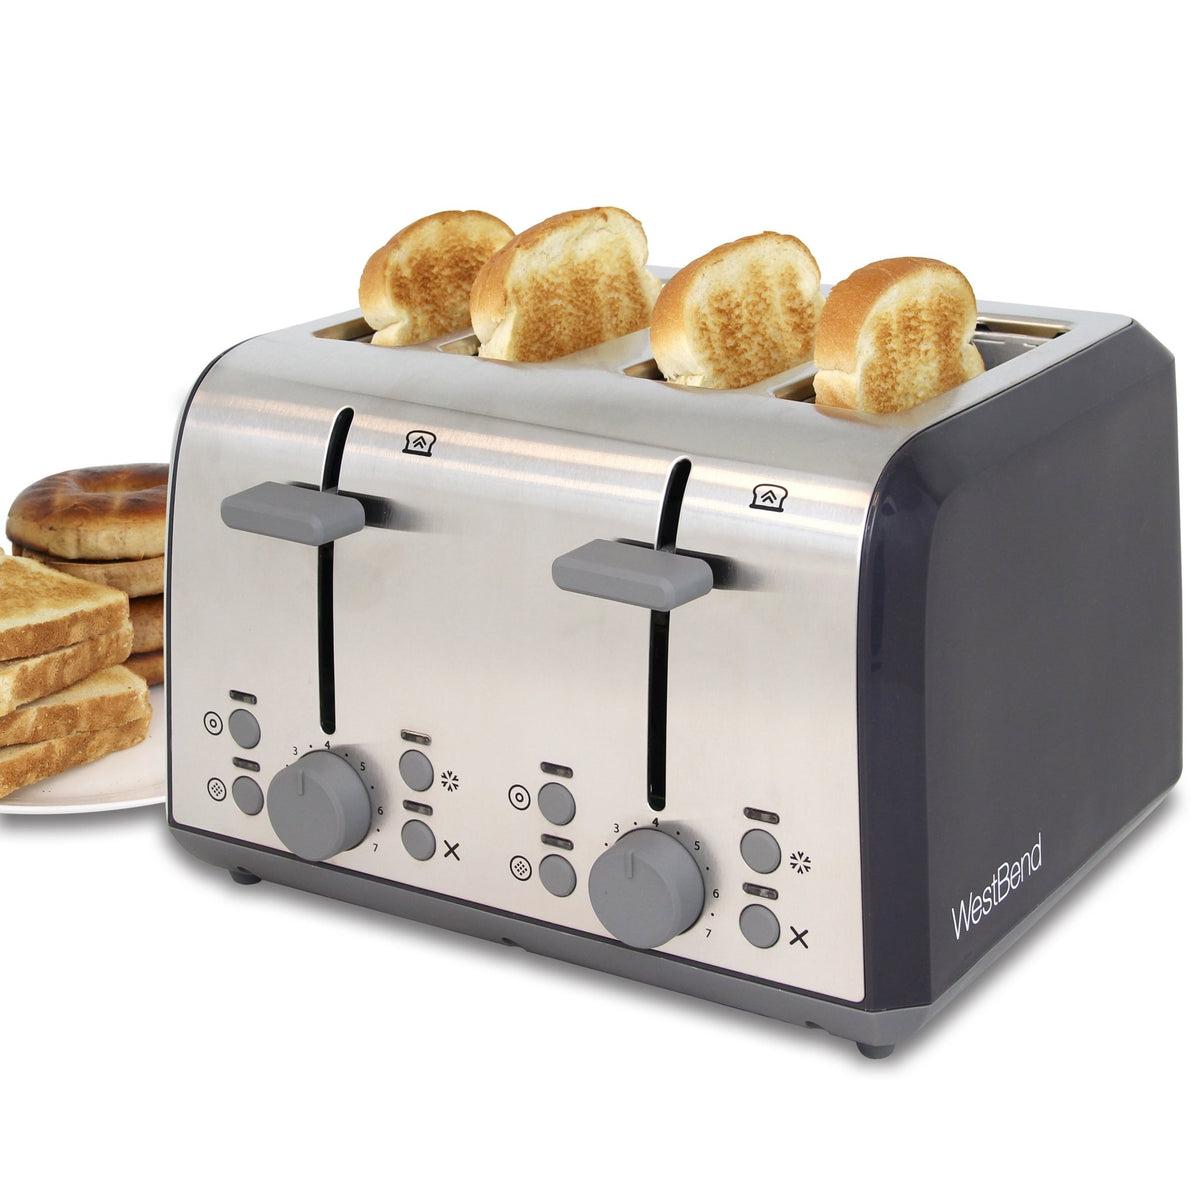  West Bend Toaster with Egg Cooker (Discontinued by  Manufacturer): Home & Kitchen